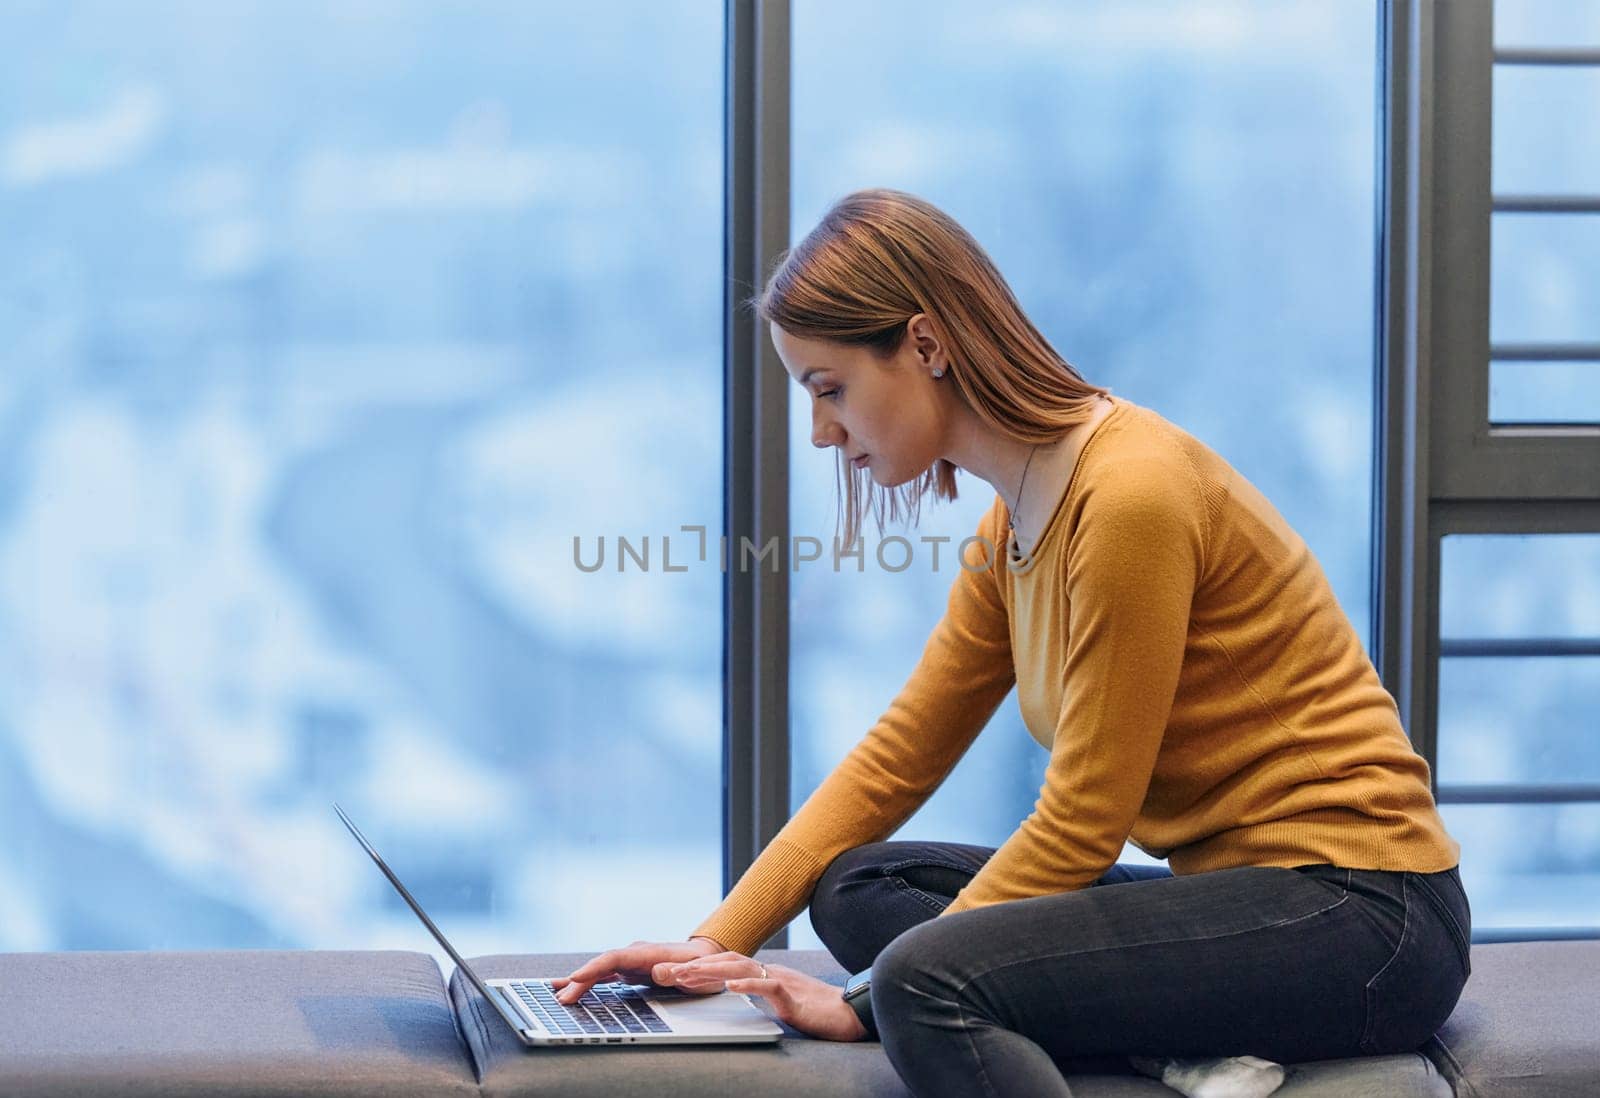 A businesswoman utilizes her laptop while seated by the window of a large corporate building, offering a picturesque view of the city skyline as her backdrop